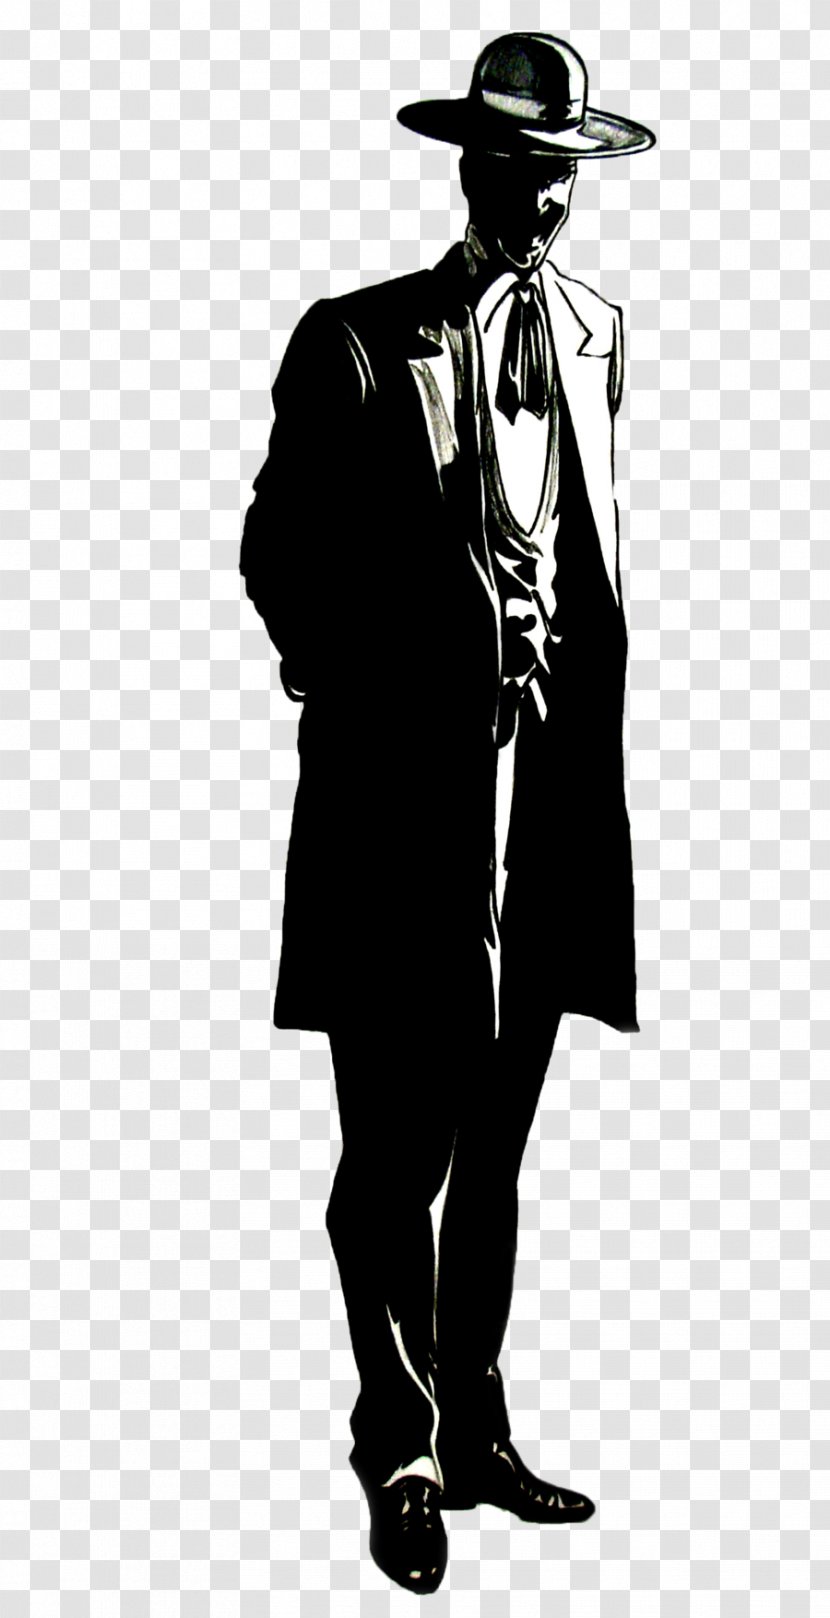 Tuxedo Silhouette - Formal Wear Transparent PNG